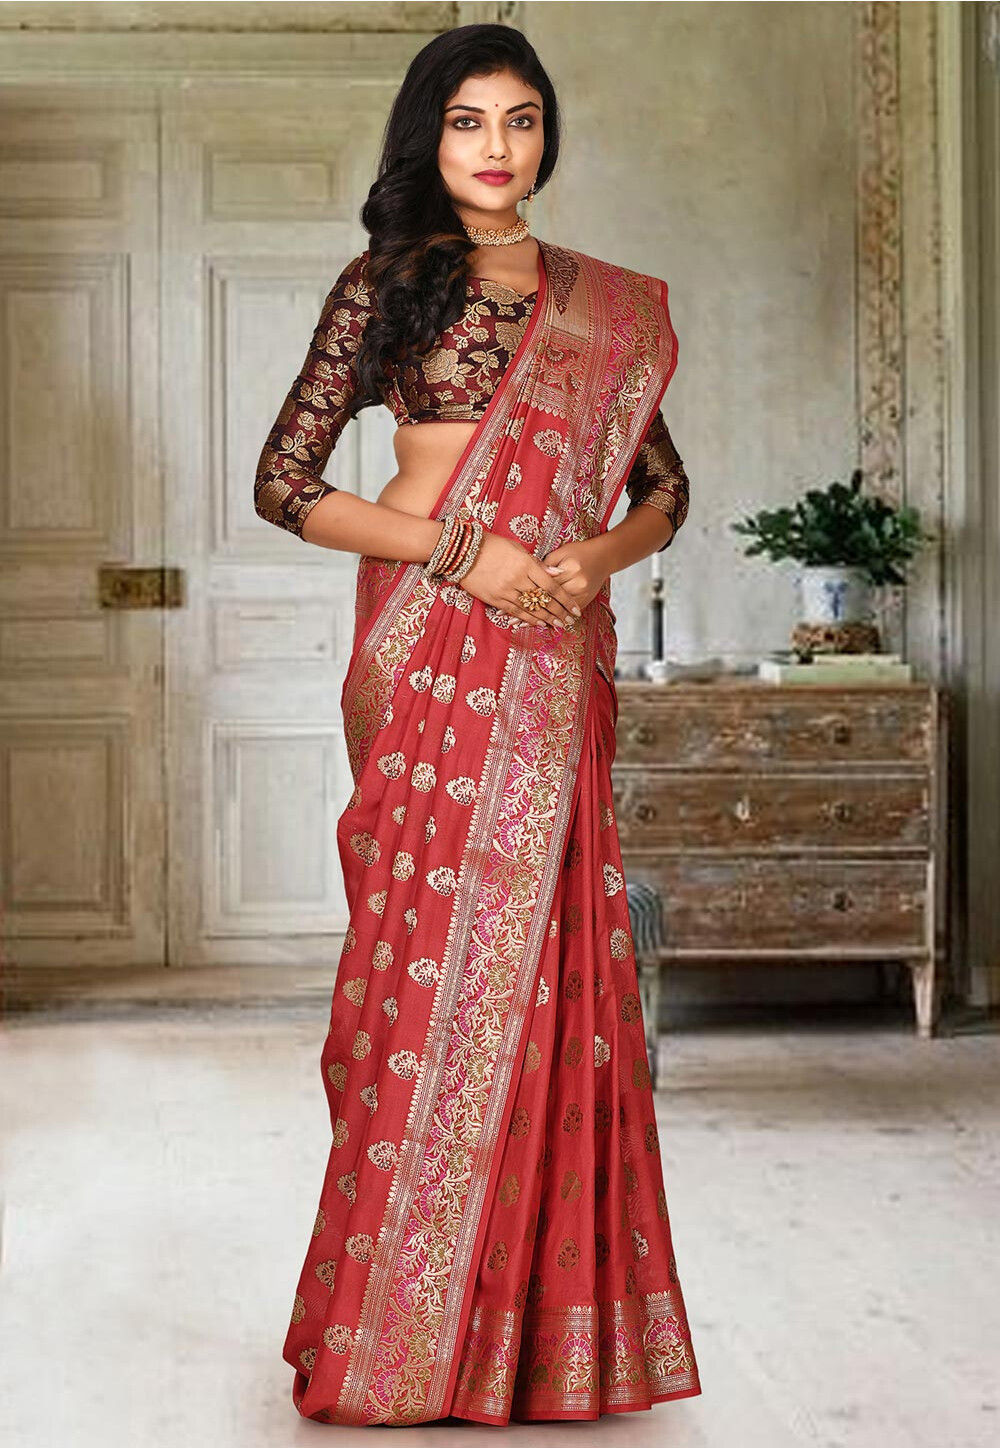 New) Wholesale saree manufacturers in Surat - Rs.749/-